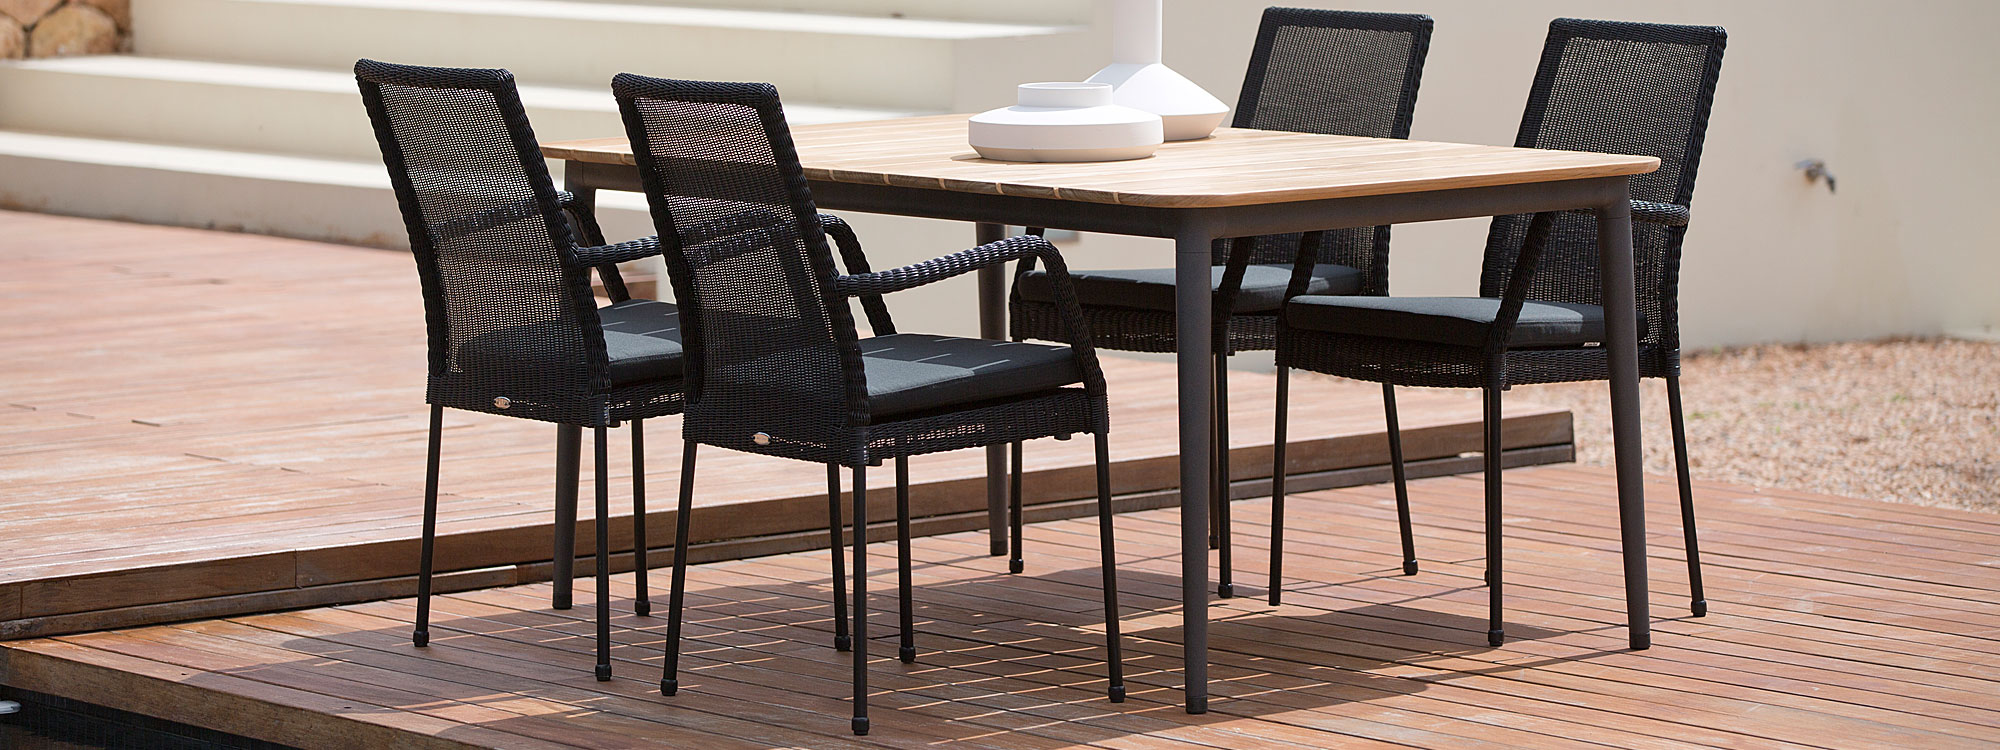 Image of black Cane-line Newport stacking garden chair around Core teak dining table